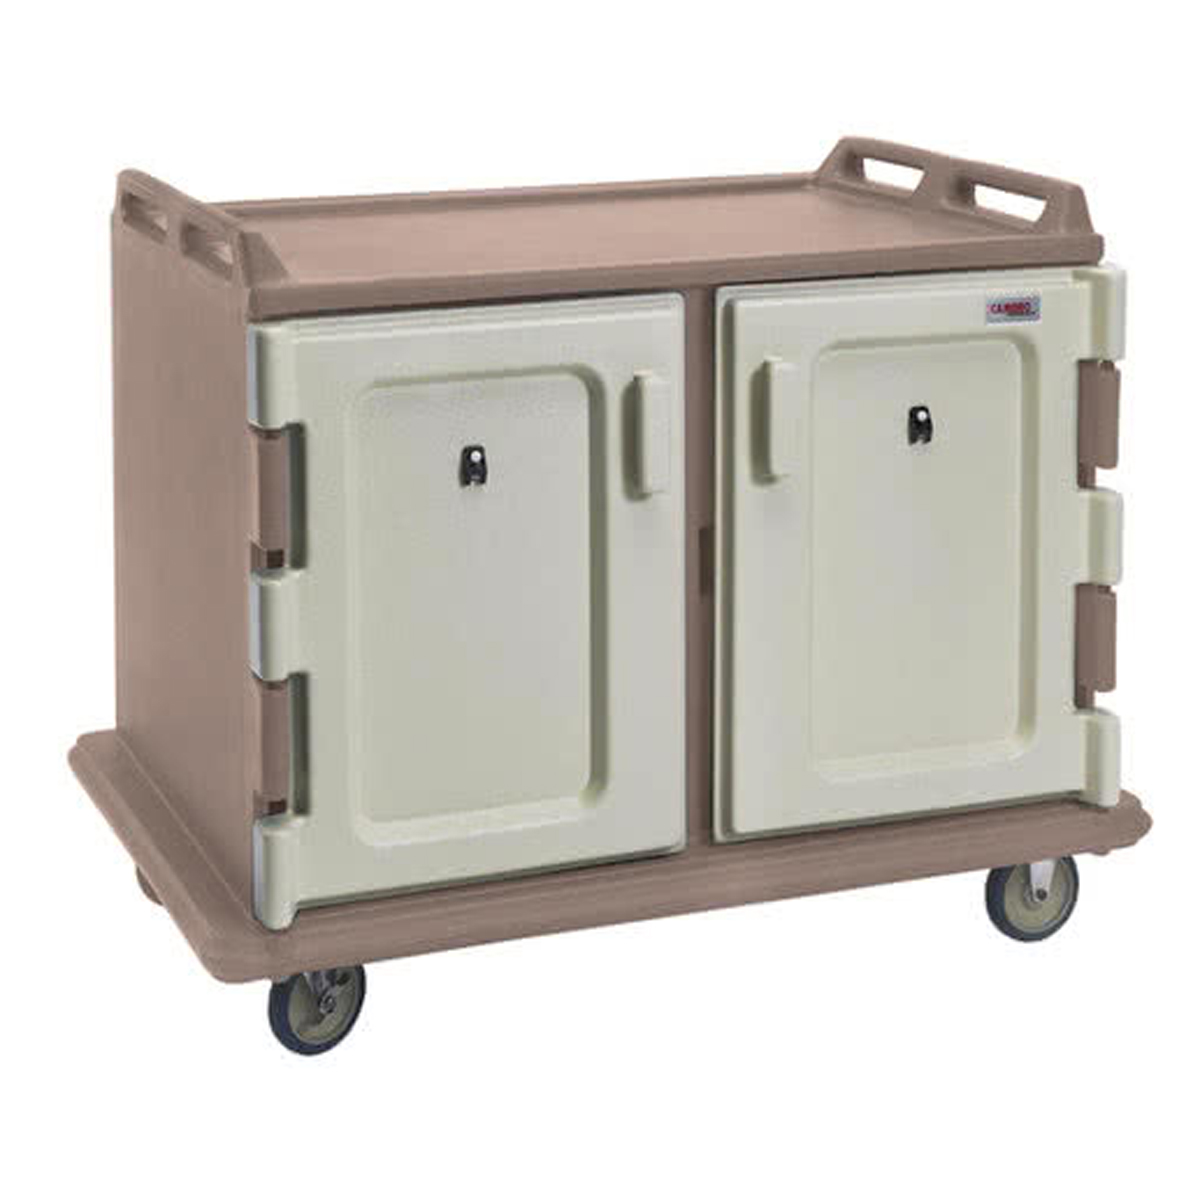 Cambro MDC1520S20194 Meal-Delivery Cart for Tray Service - 2 Compartments for 15'' x 20'' Trays - Low - Granite Sand